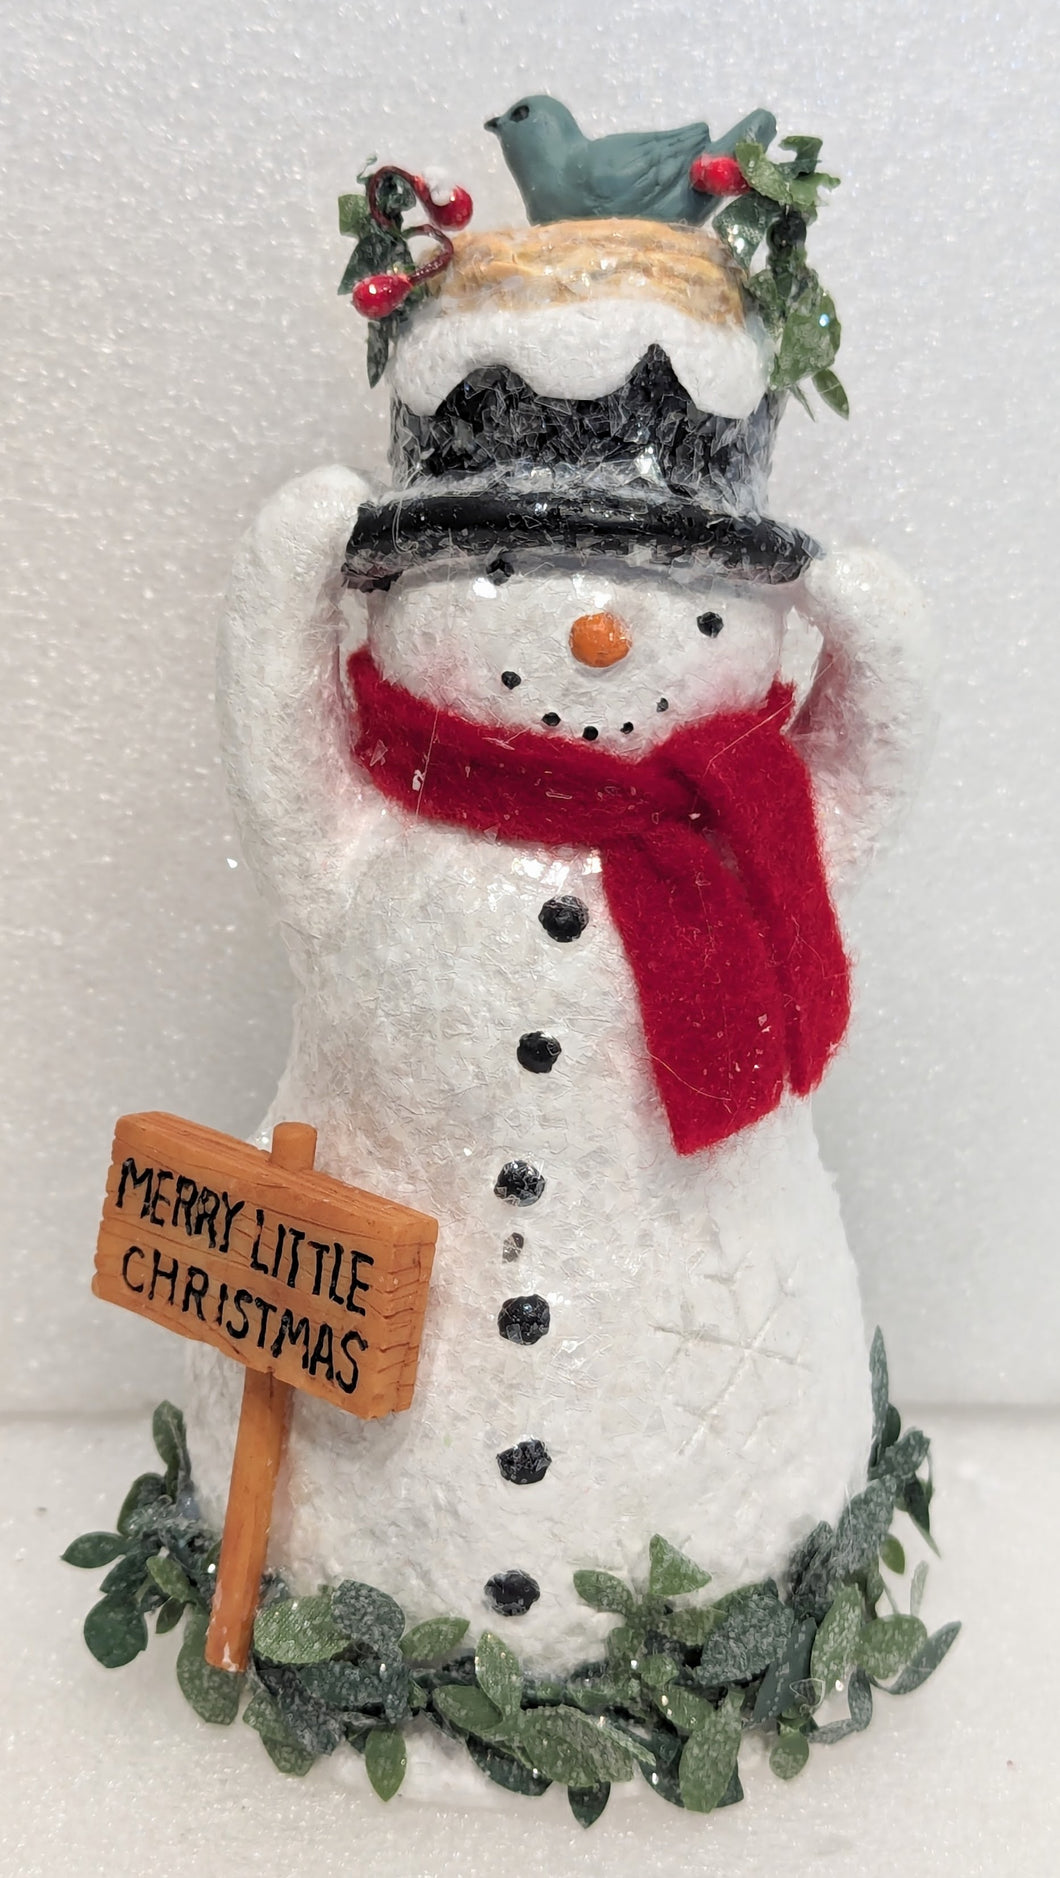 Snowman Figurine Wearing Black Hat with Bird's Nest On Top & Red Scarf